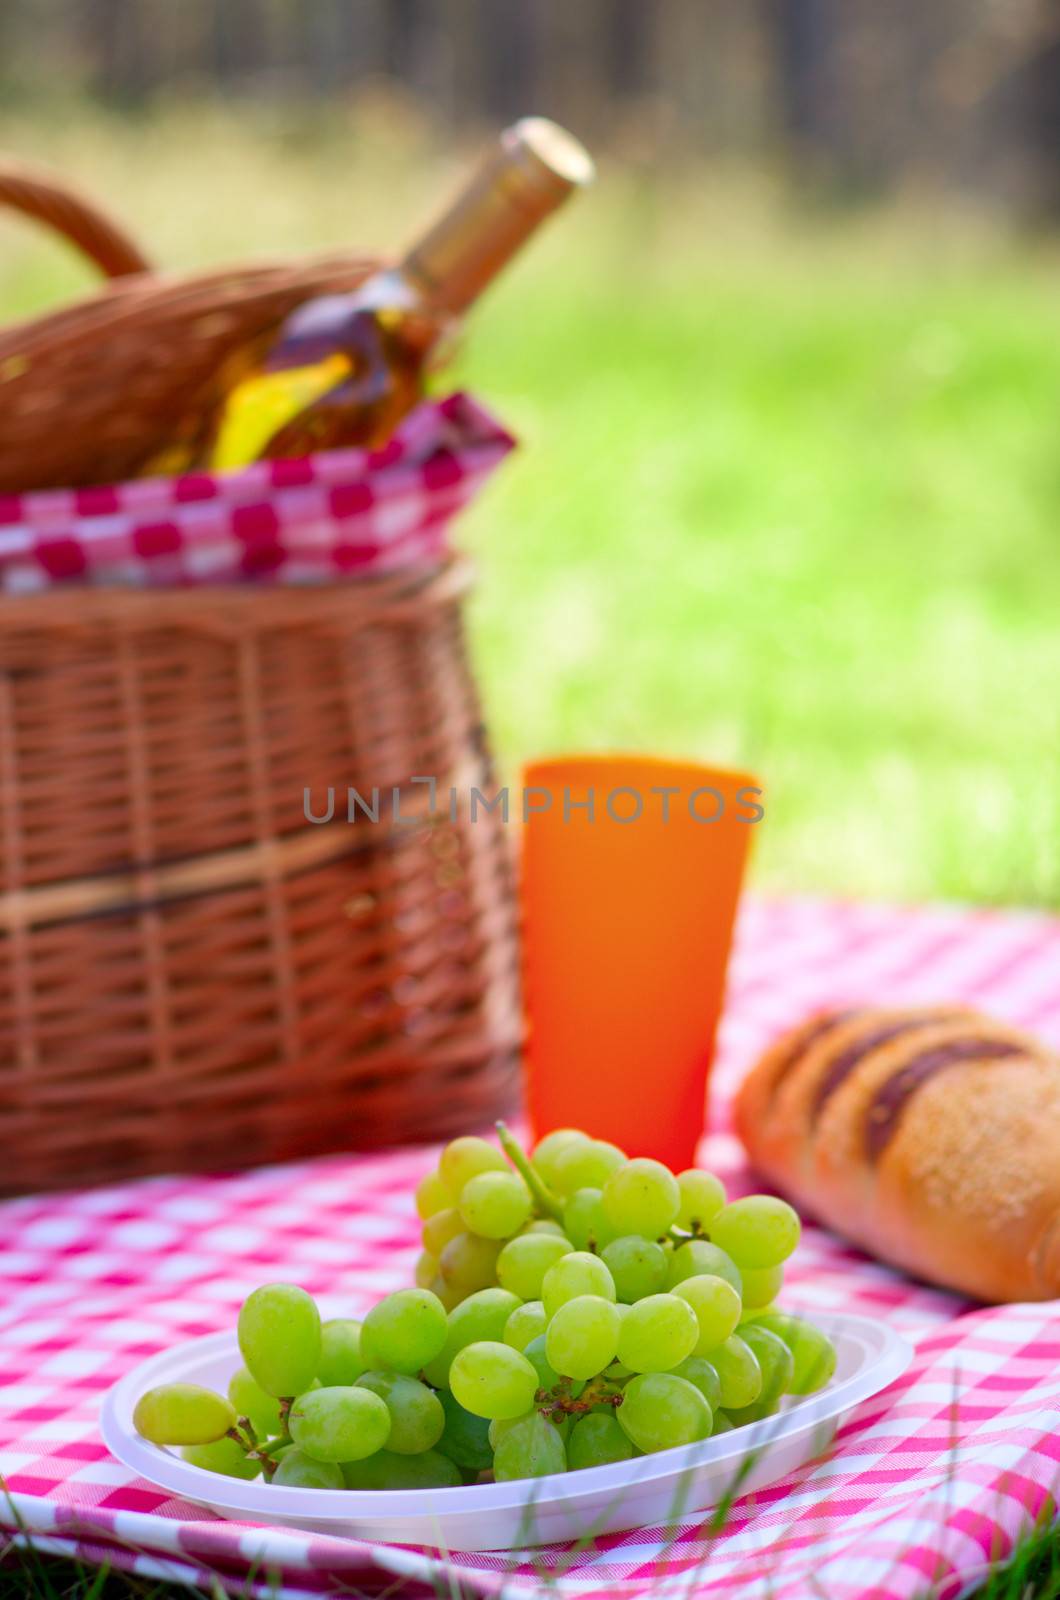 Picnic basket with bottle of wine and food by rbv